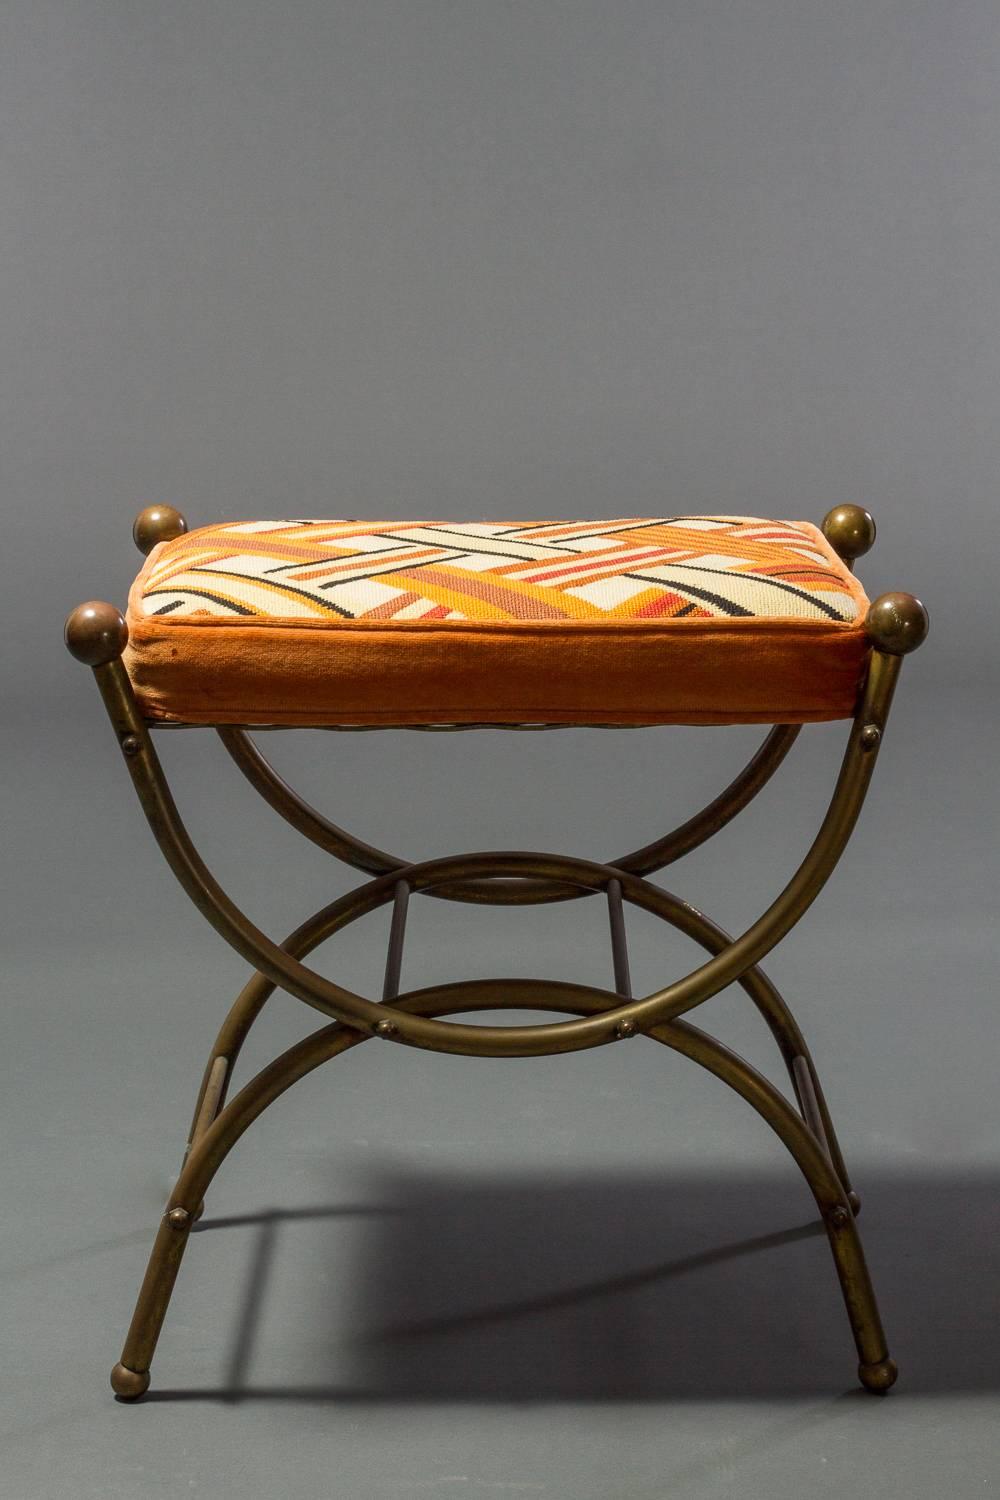 Pair of small stools or benches. Bronze with cross stitched cushions.